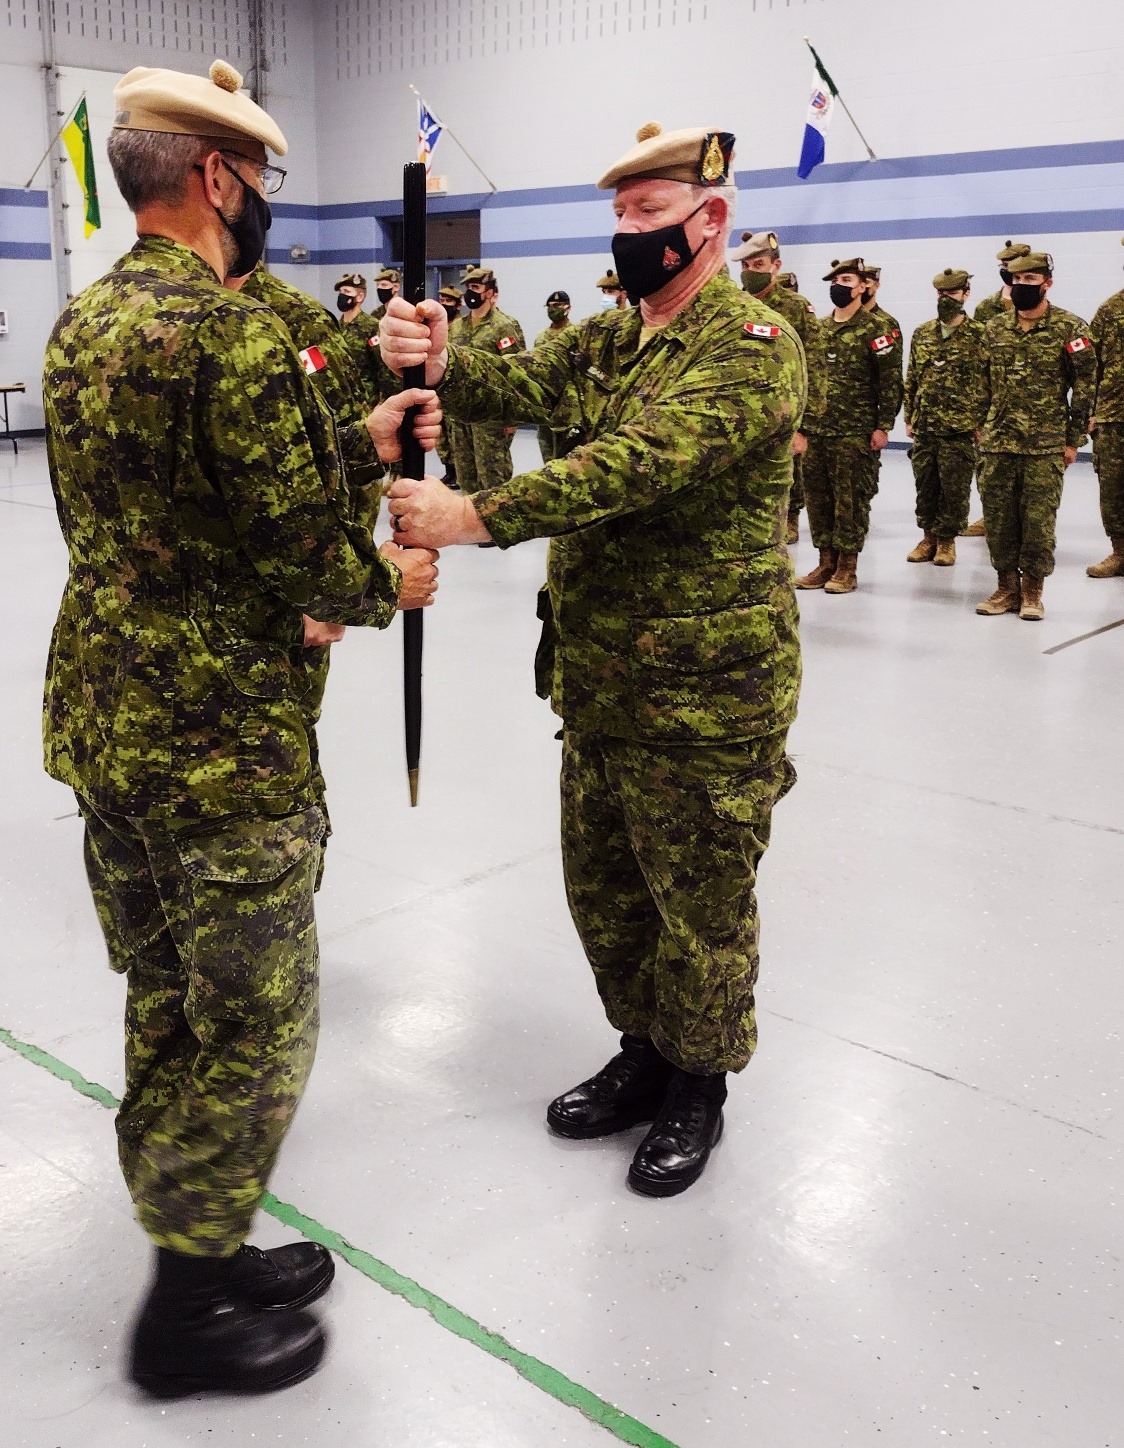 Outgoing RSM, CWO Brian Jordan hands pace stick to CO, LCol Gord Prentice